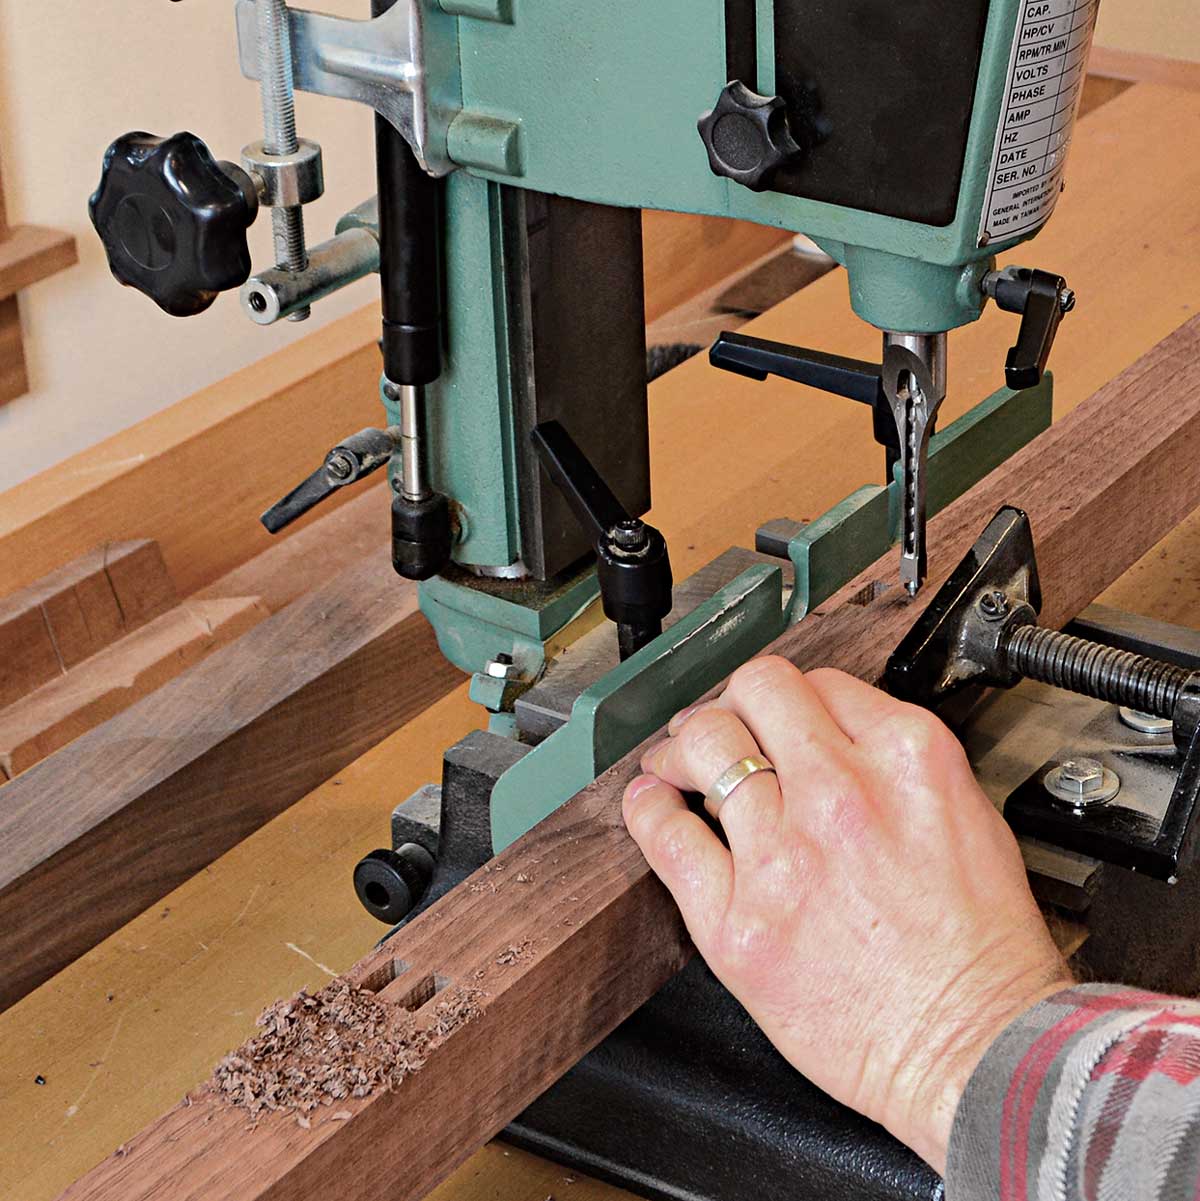 With double tenons, consistent mortise spacing is key. Korsak cuts one mortise of each pair, then shifts the mortiser’s fence to cut all the second mortises.